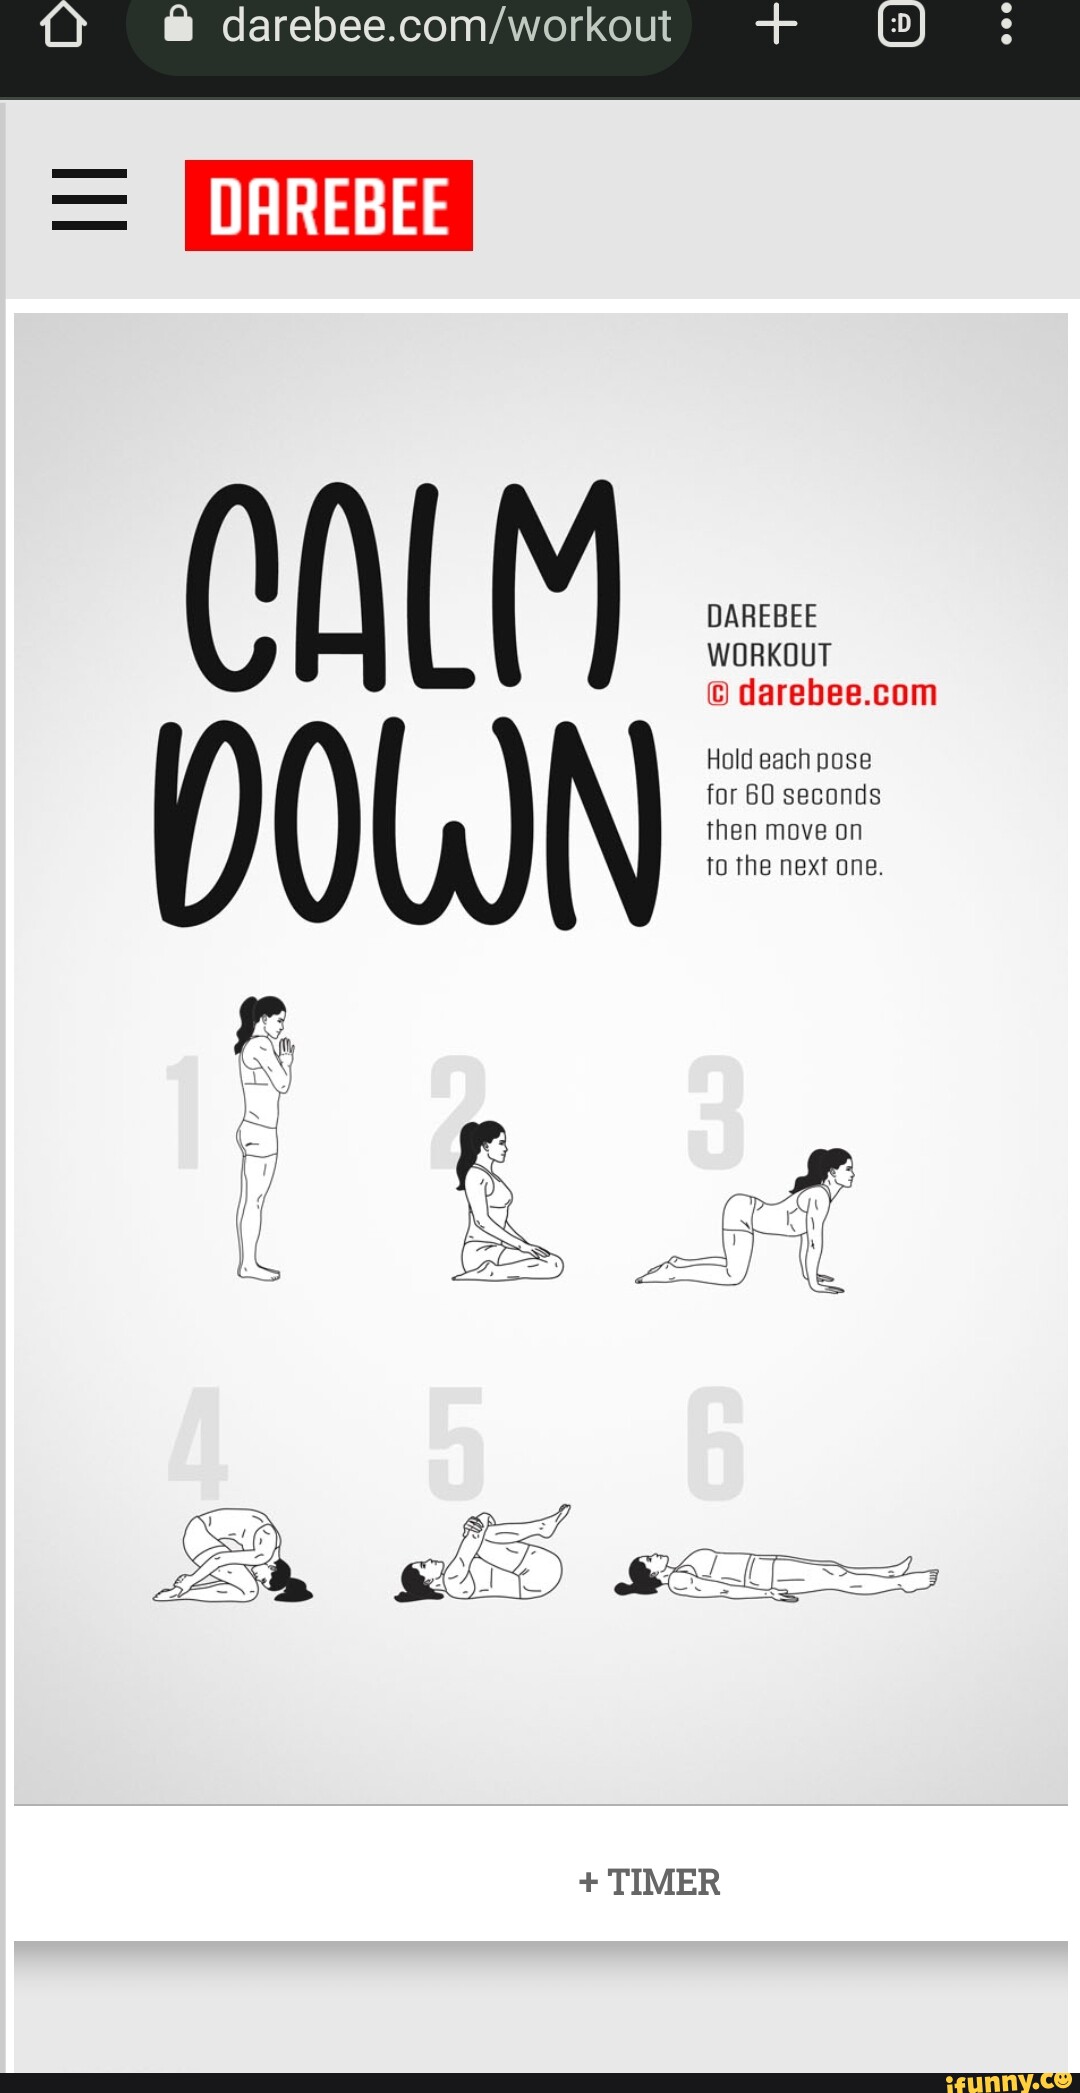 DAREBEE DAREBEE WORKOUT Hold each pose for 60 seconds then move on